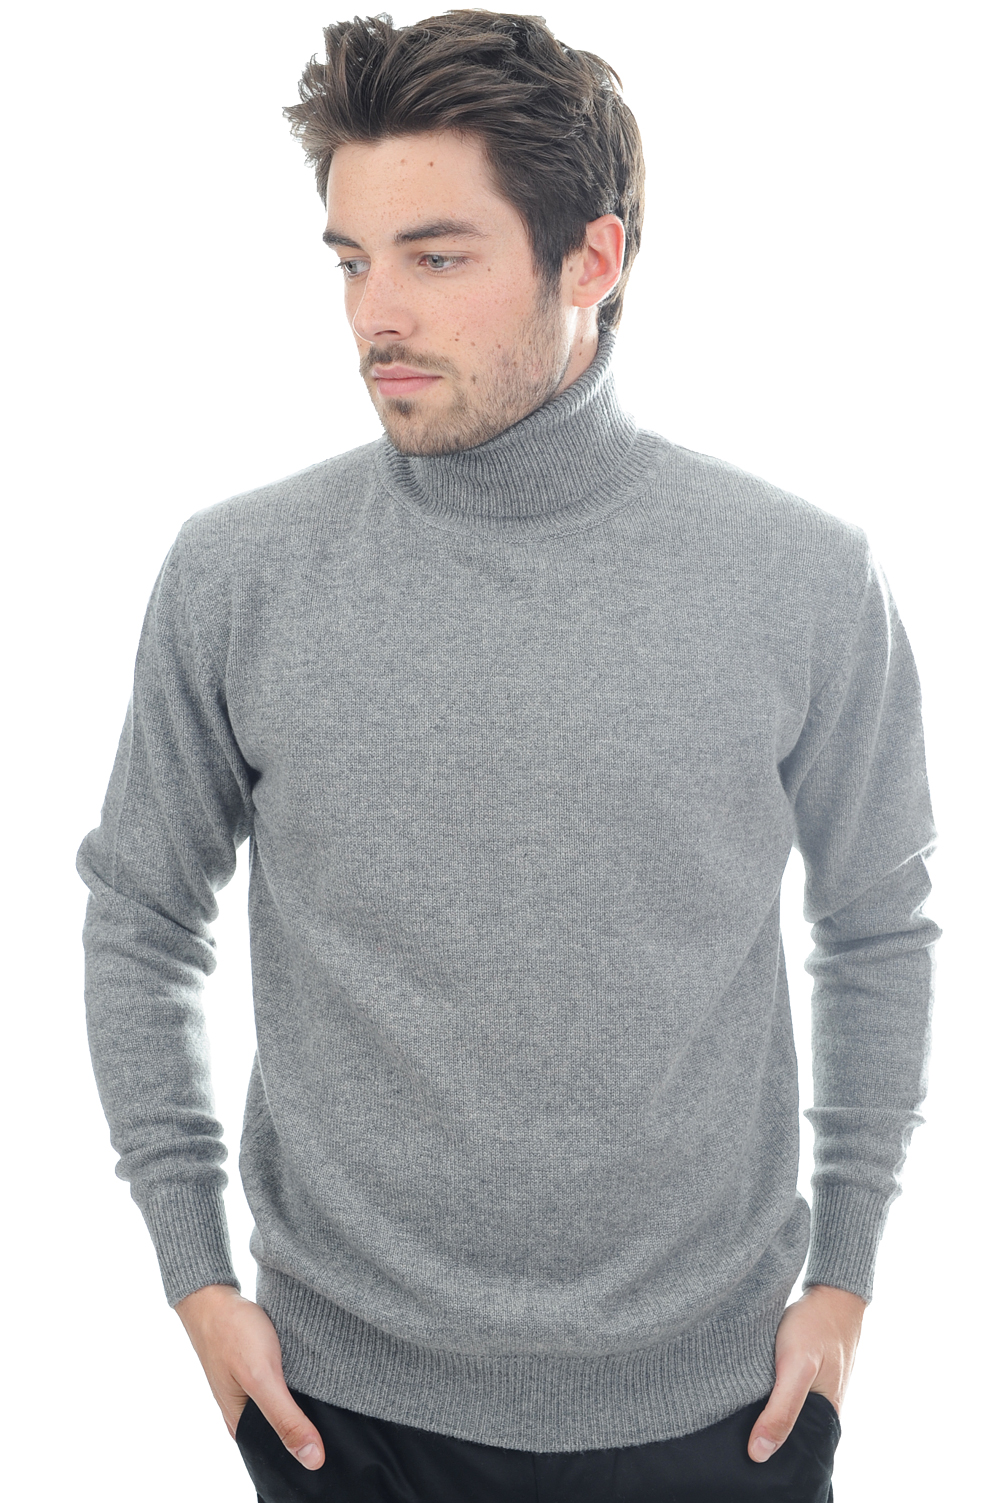 Cachemire pull homme edgar 4f gris chine xs